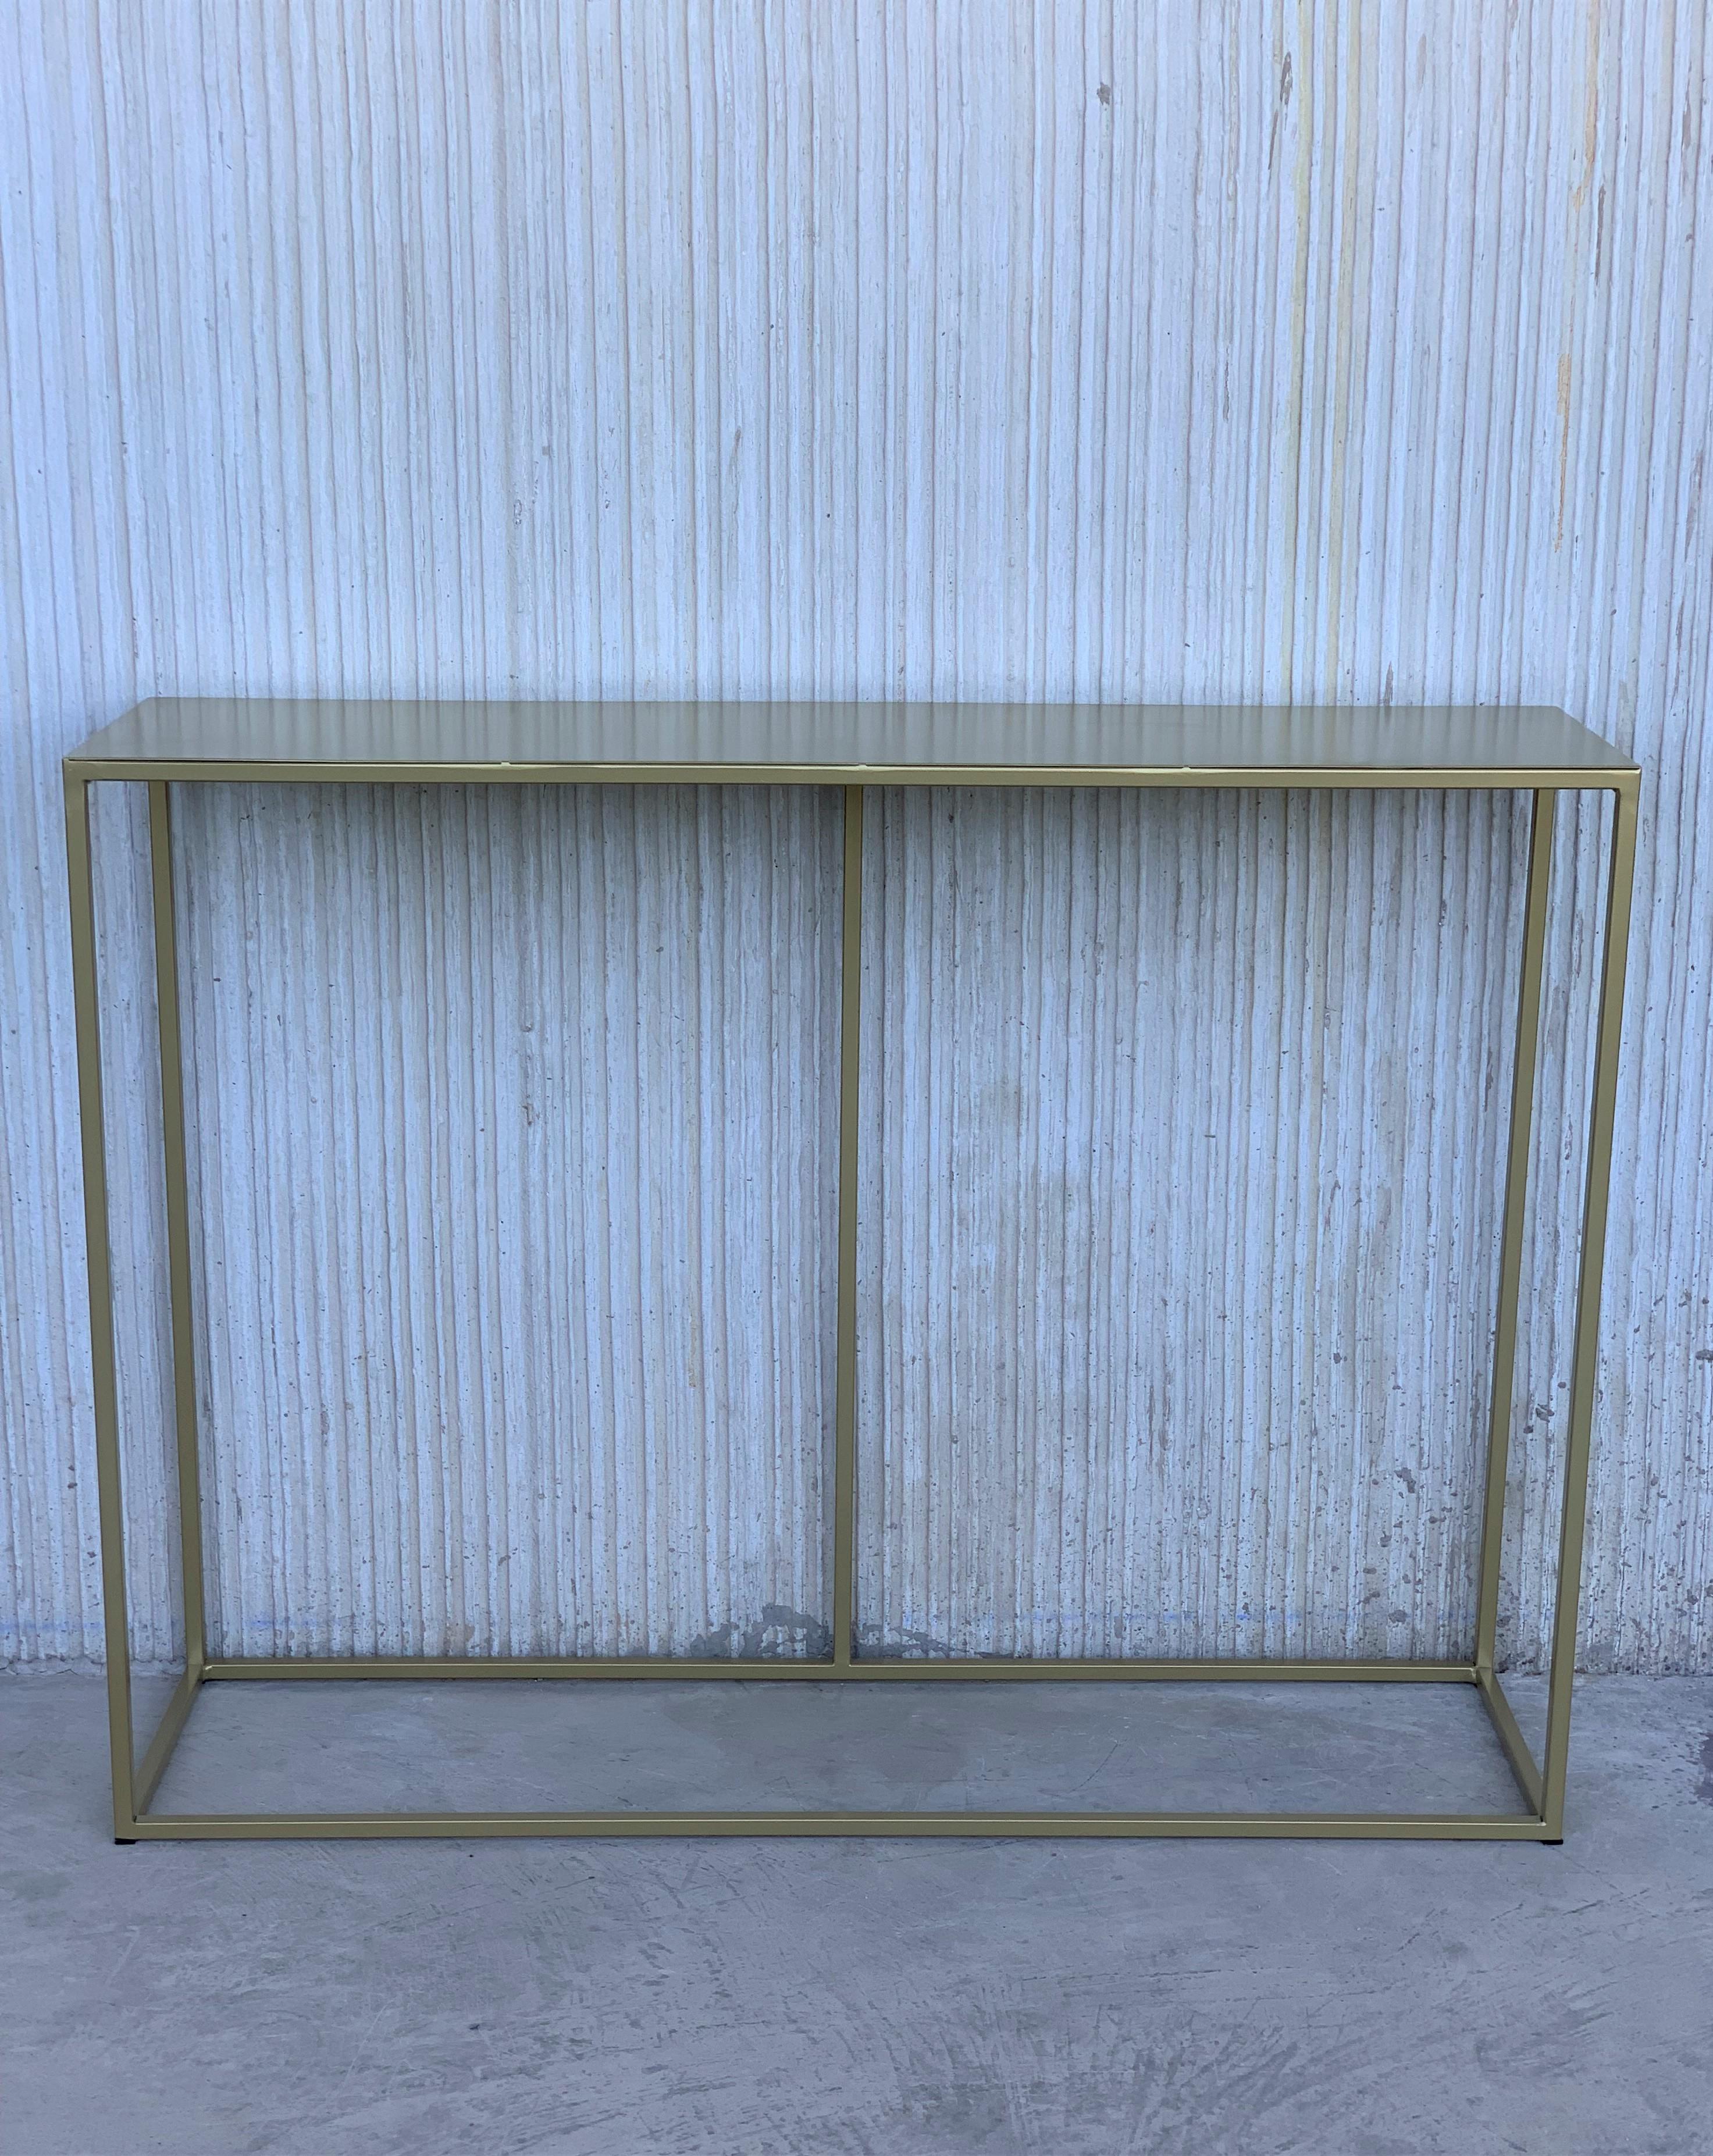 New Rectangullar Gilted Iron Console Table with Metal Top In Excellent Condition For Sale In Miami, FL